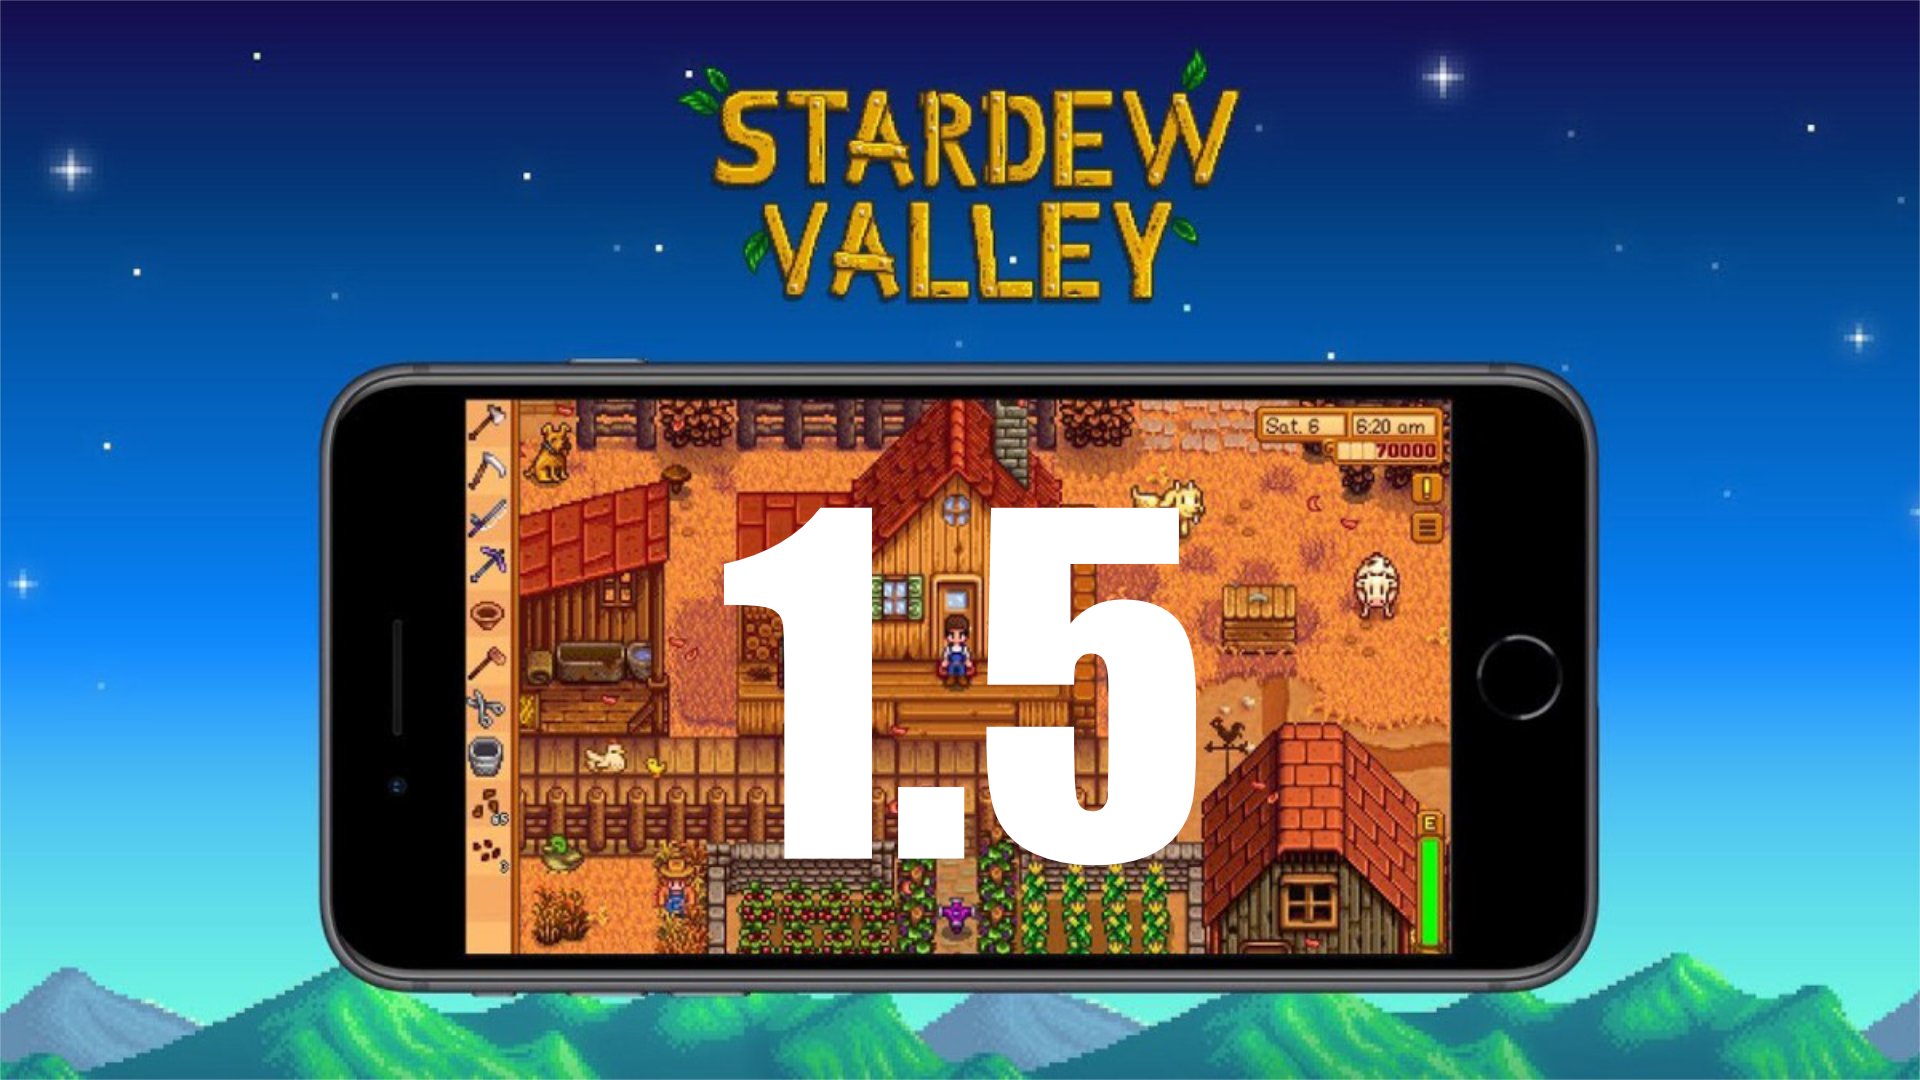 Major Stardew Valley update finally comes to iOS and Android KitGuru